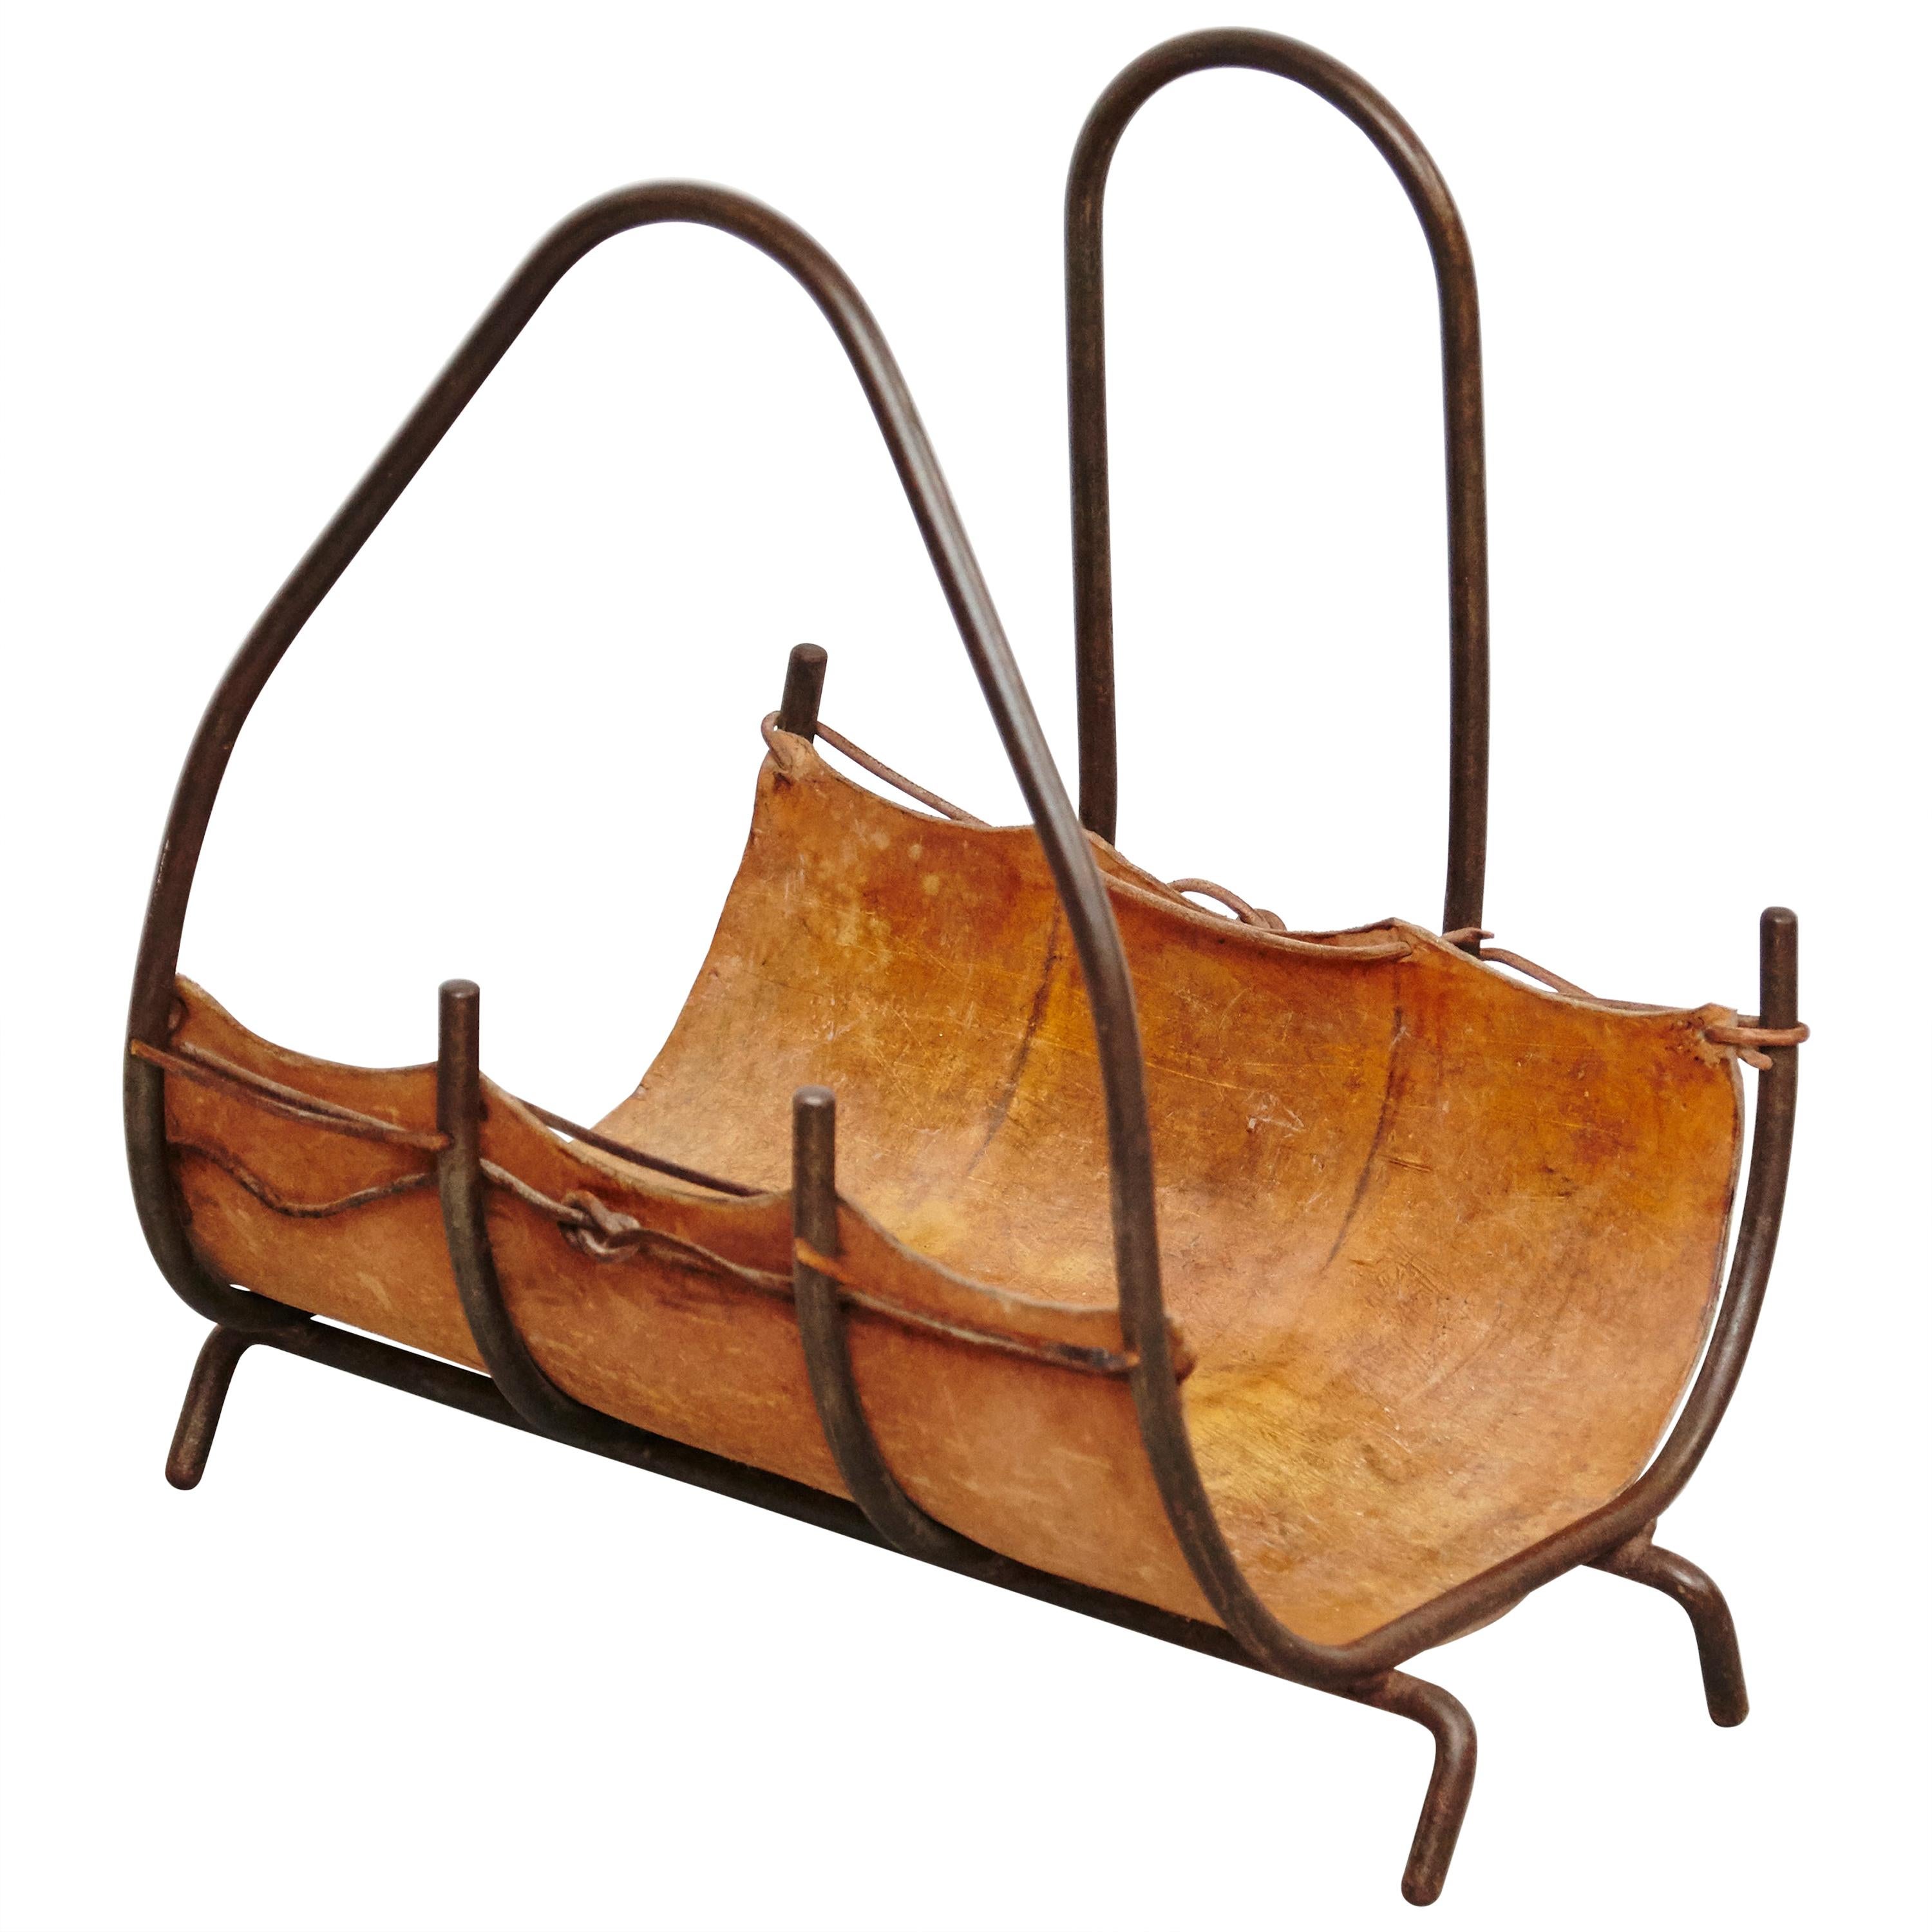 Antique Leather and Metal Firewood Basket, circa 1960